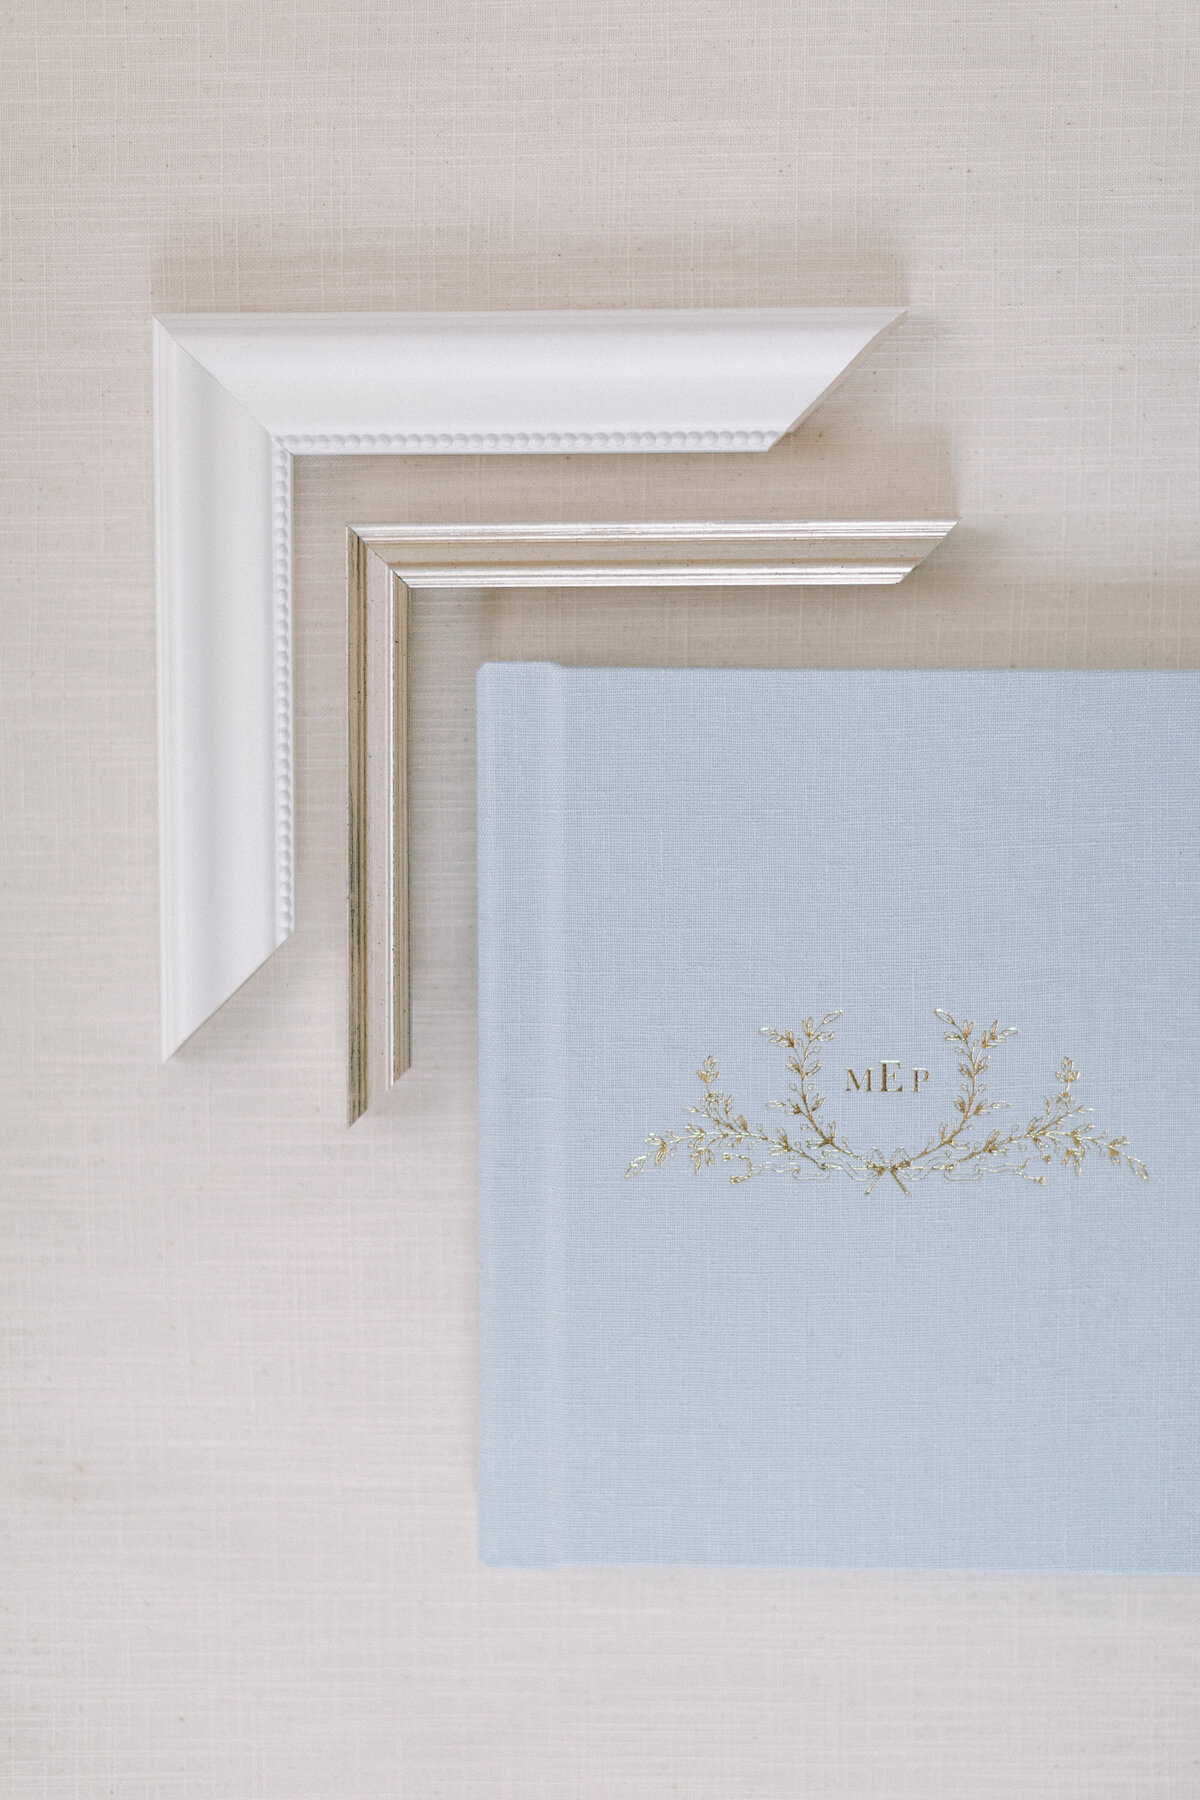 A white and gold frame corner along with a light blue photo album